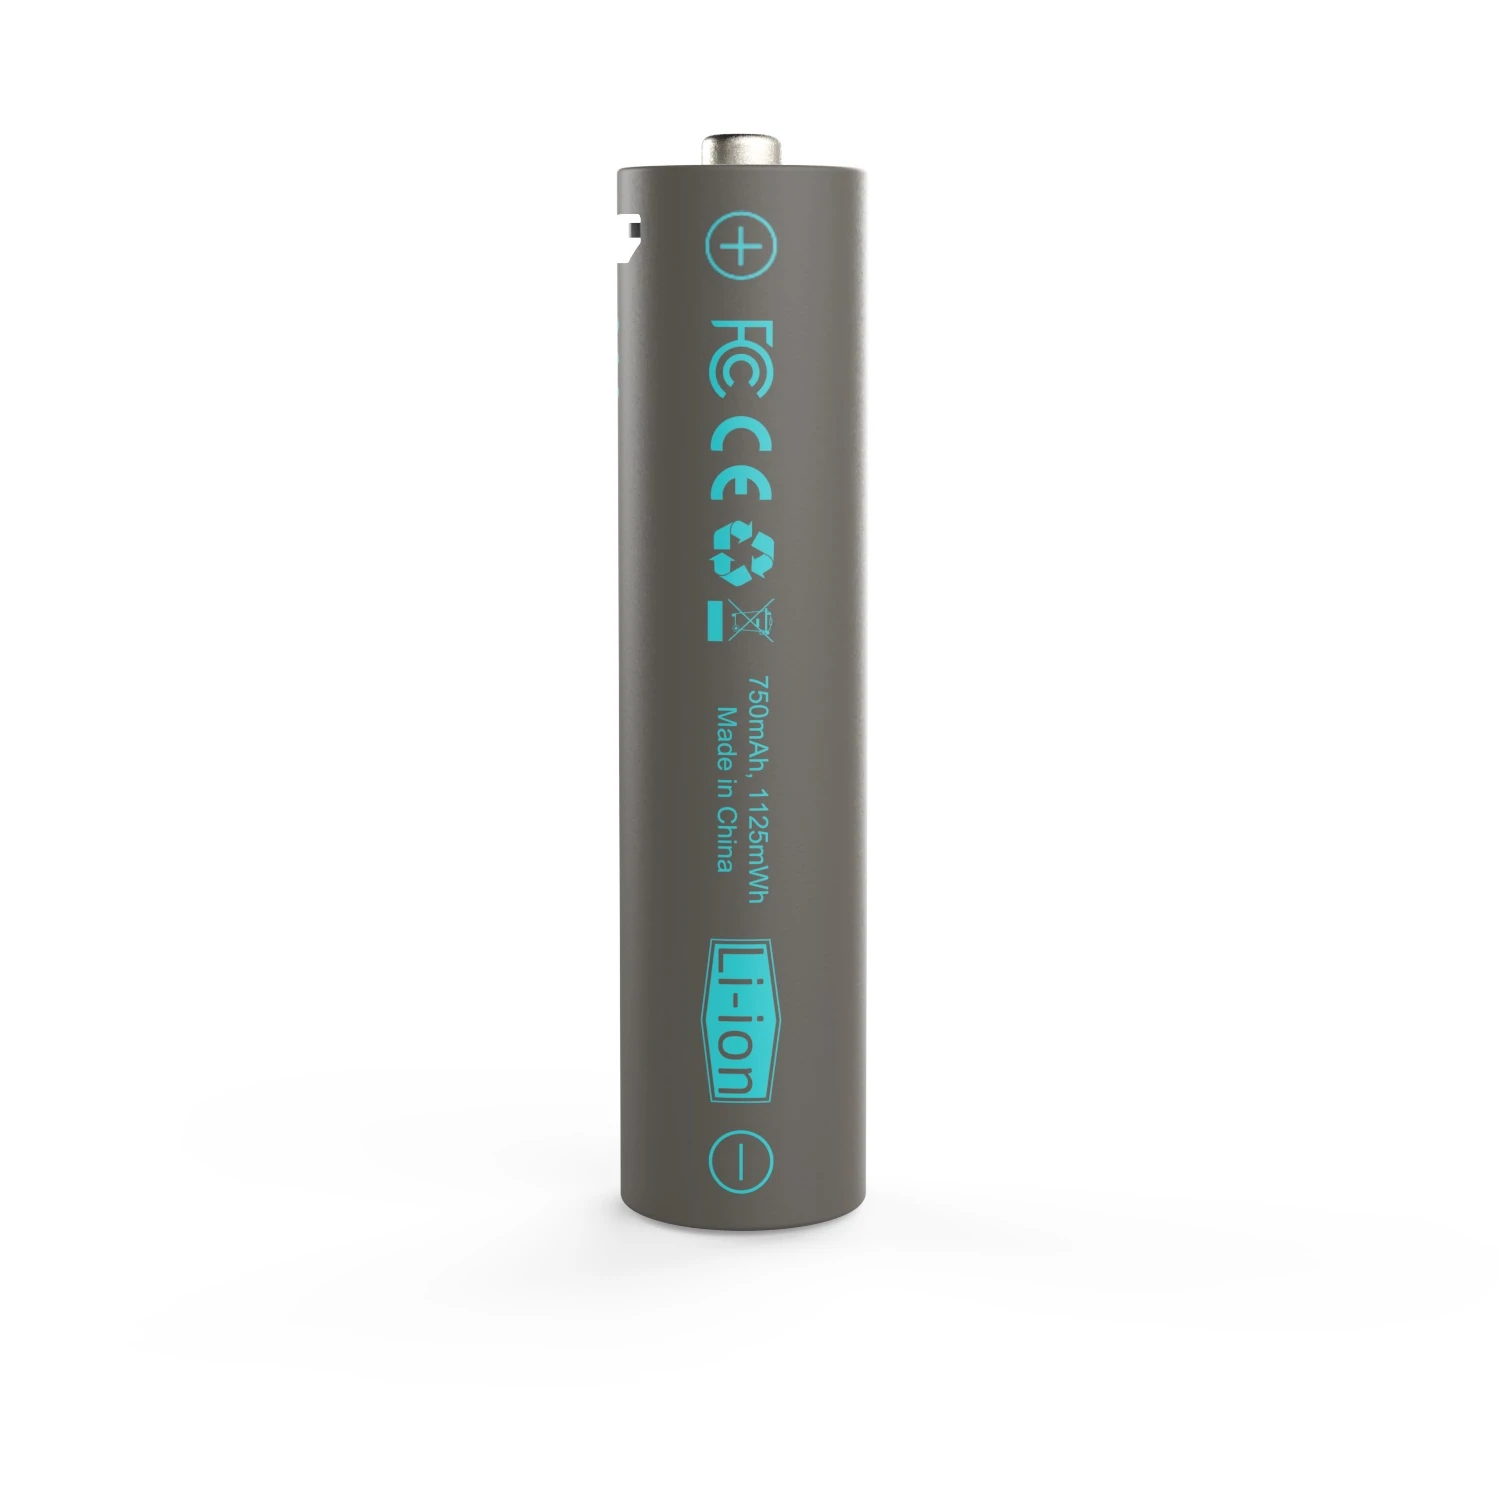 Pile rechargeable AA USB 1,5 V au lithium AAA - Chine Batterie, batterie  solaire